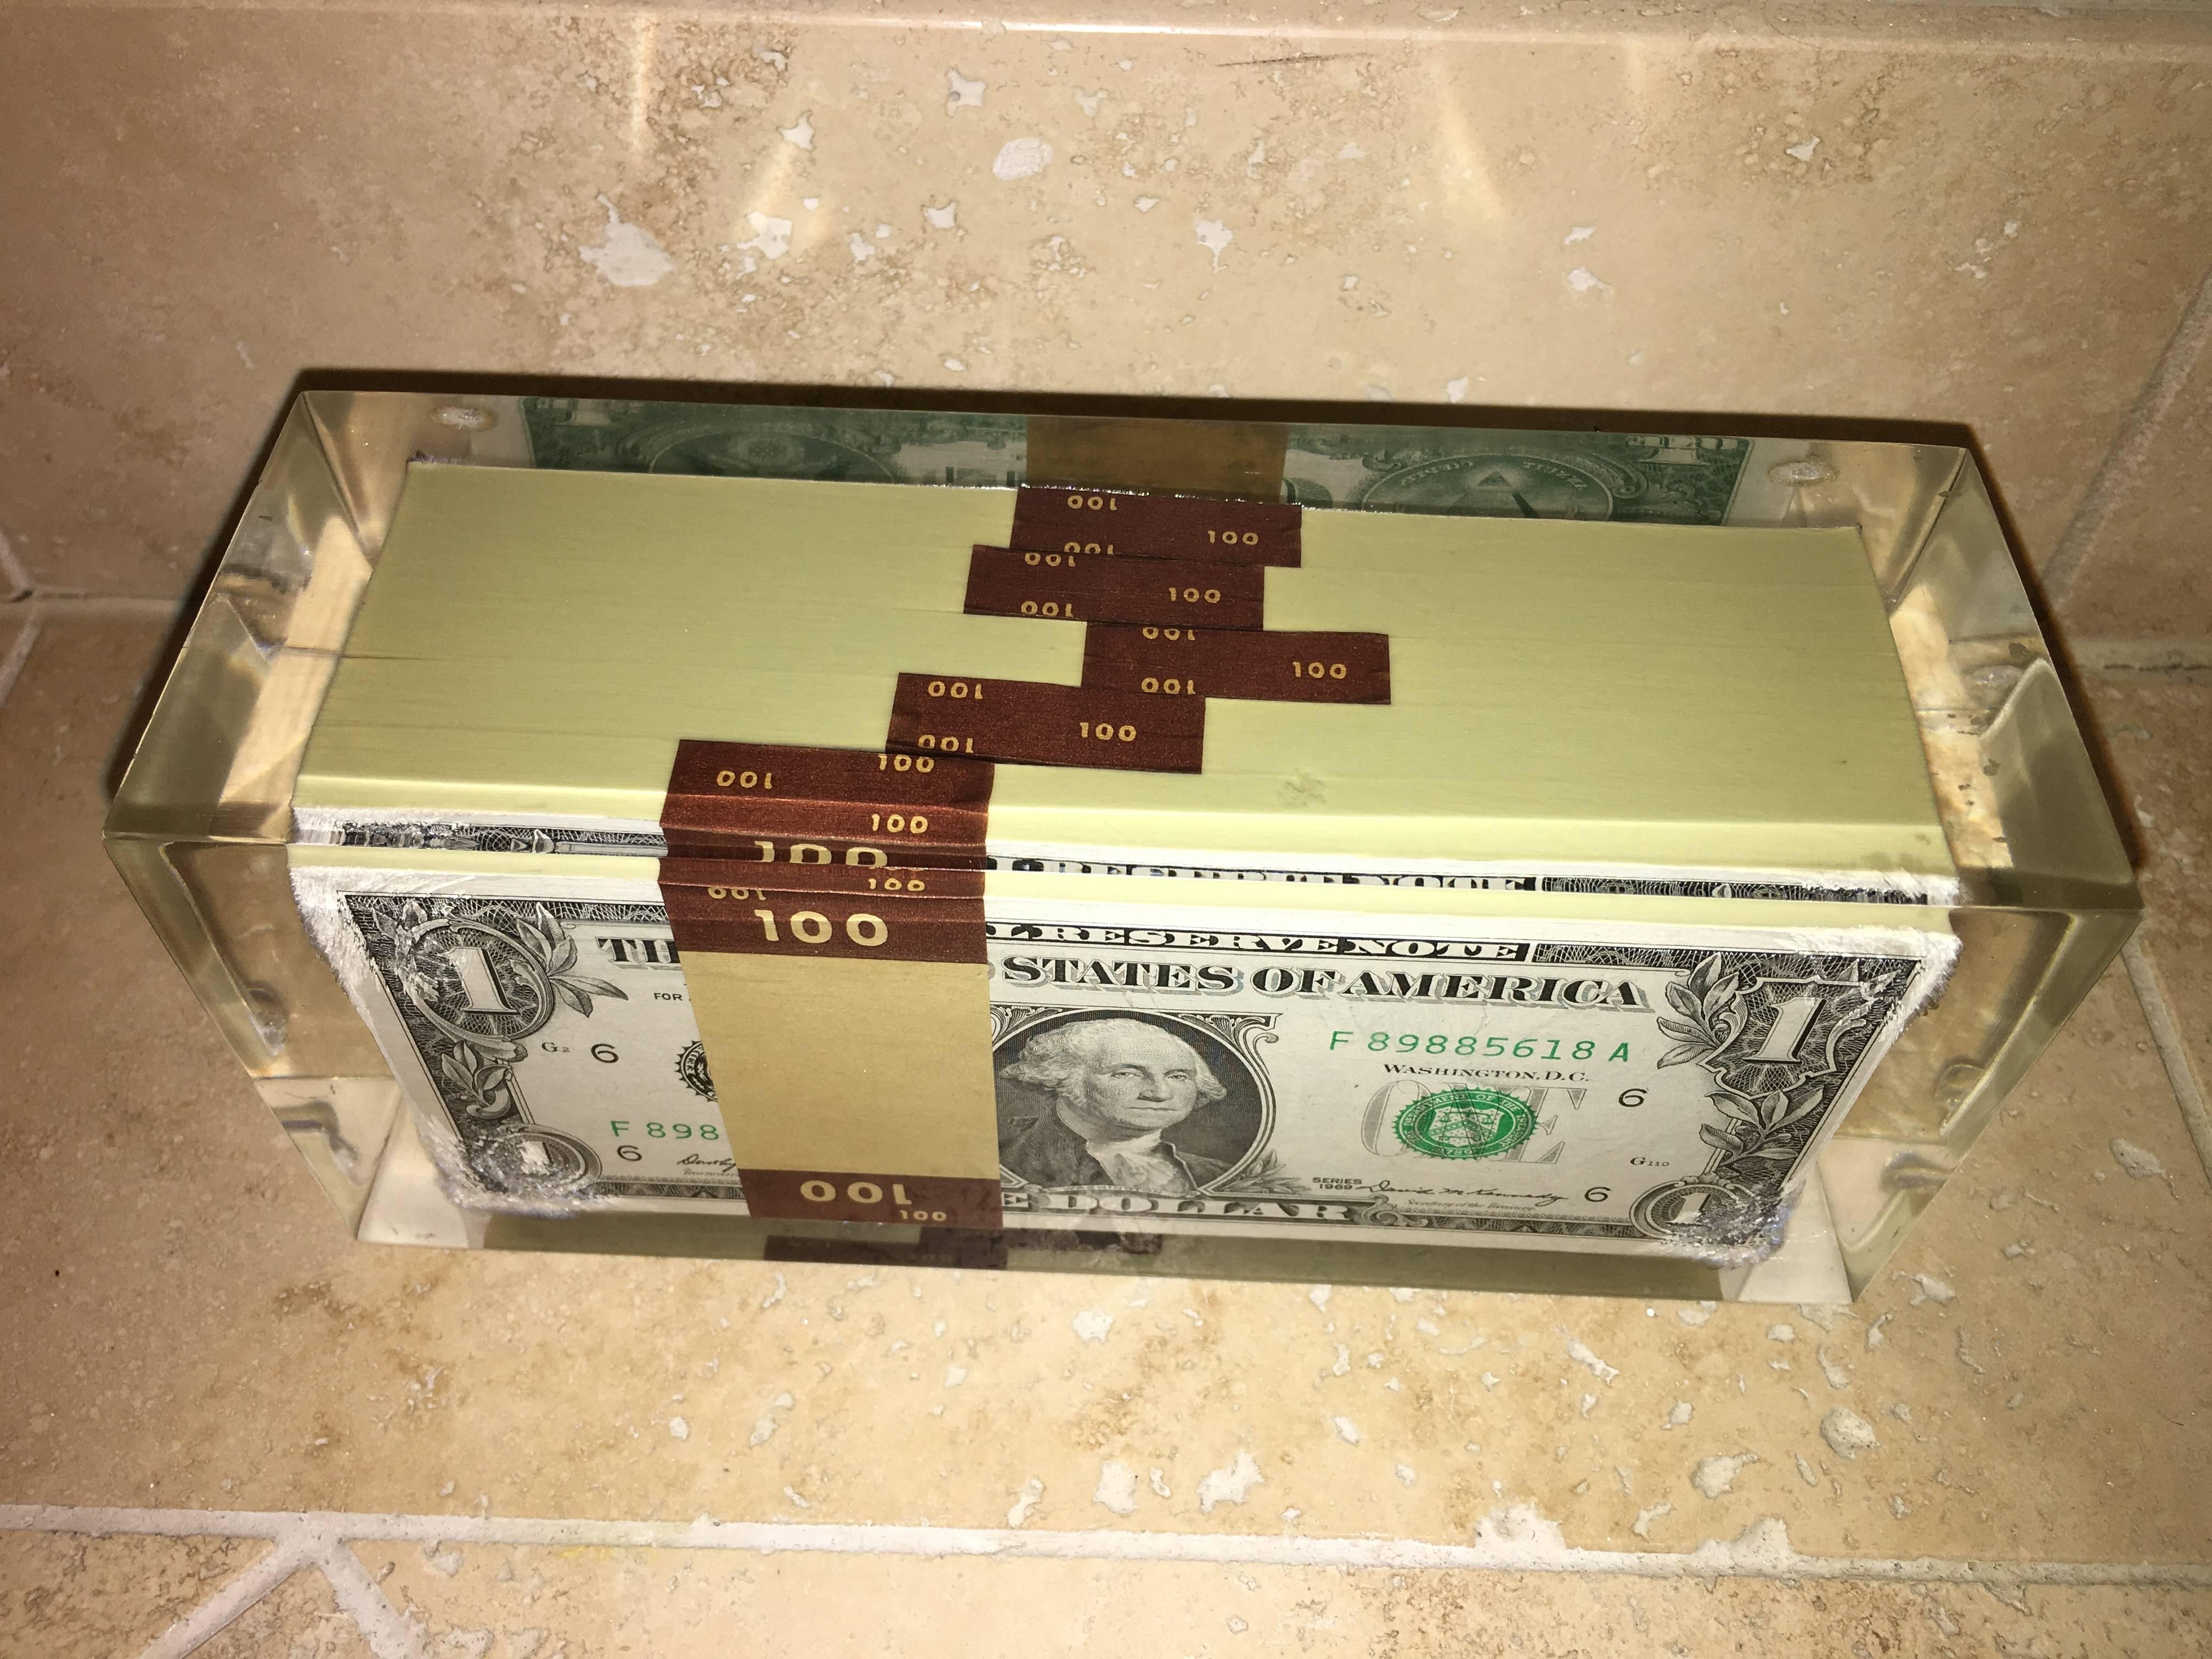 Terrific Lucite encased stack of uncirculated one dollar bills sculpture. This unique object is comprised of five stacks of real 1969 uncirculated $1 bills encased in Lucite. Truly a conversation piece for any collection.